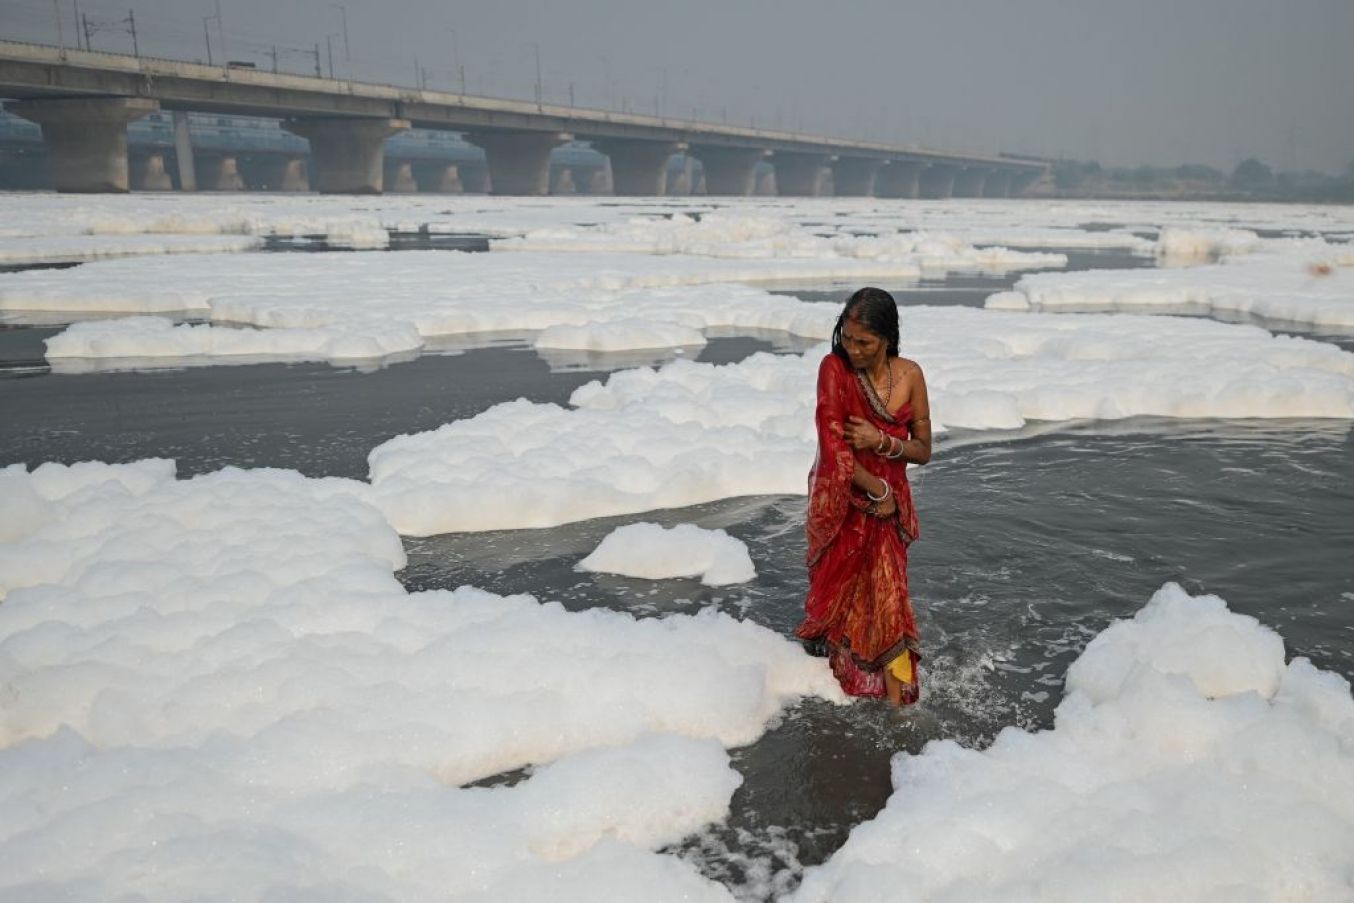 A Hindu Devotee Takes A Dip In The Yamuna River Amid Foam Created By Pollution In The Water In New Delhi. Photo: Sajjad Hussain/ Afp Via Getty Images